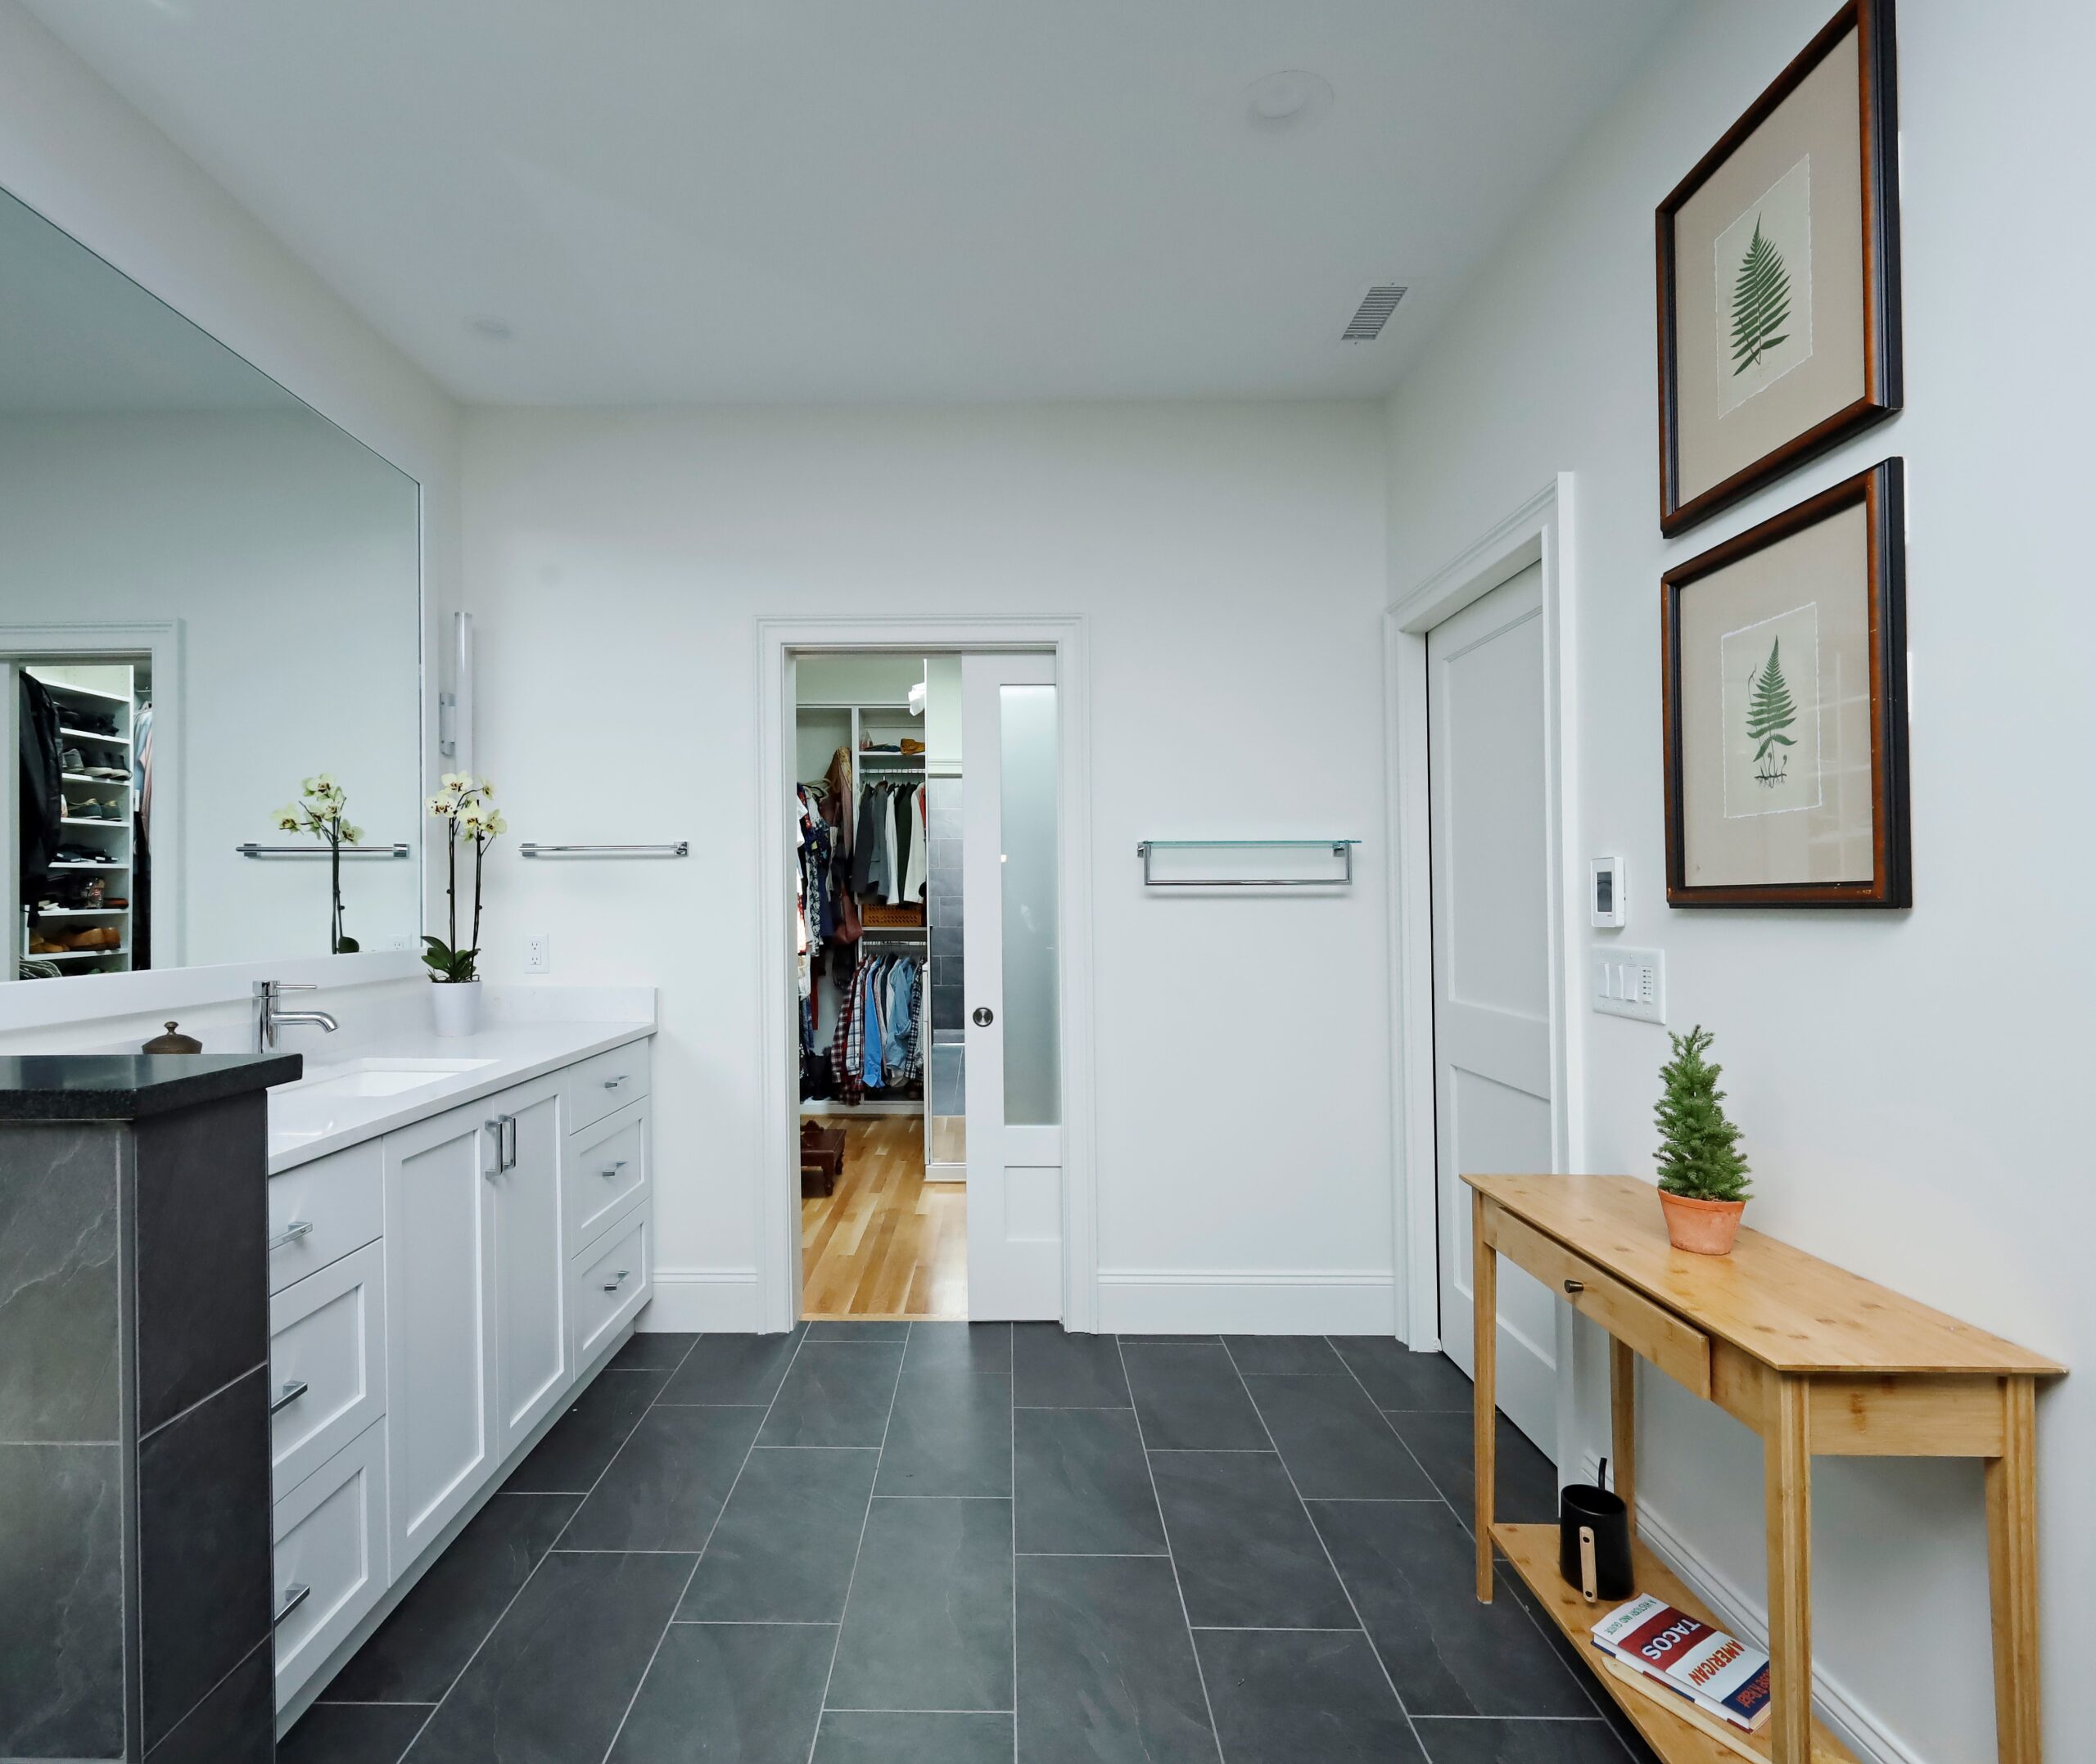 A sleek bathroom with black tile floors connects to a large walk-in closet.